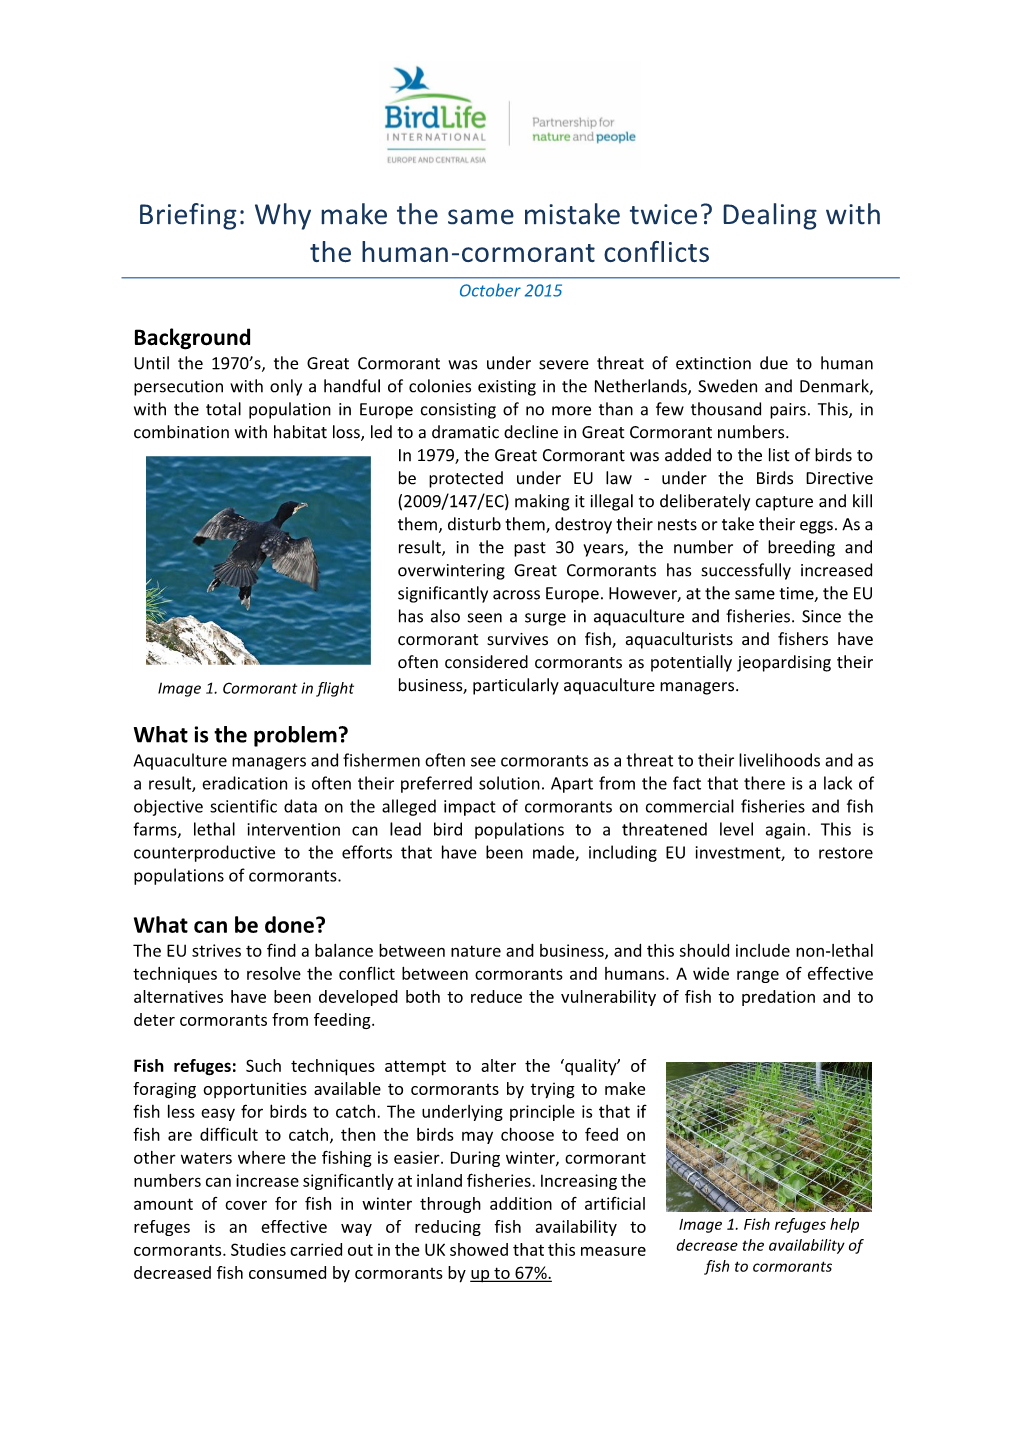 Dealing with the Human-Cormorant Conflicts October 2015